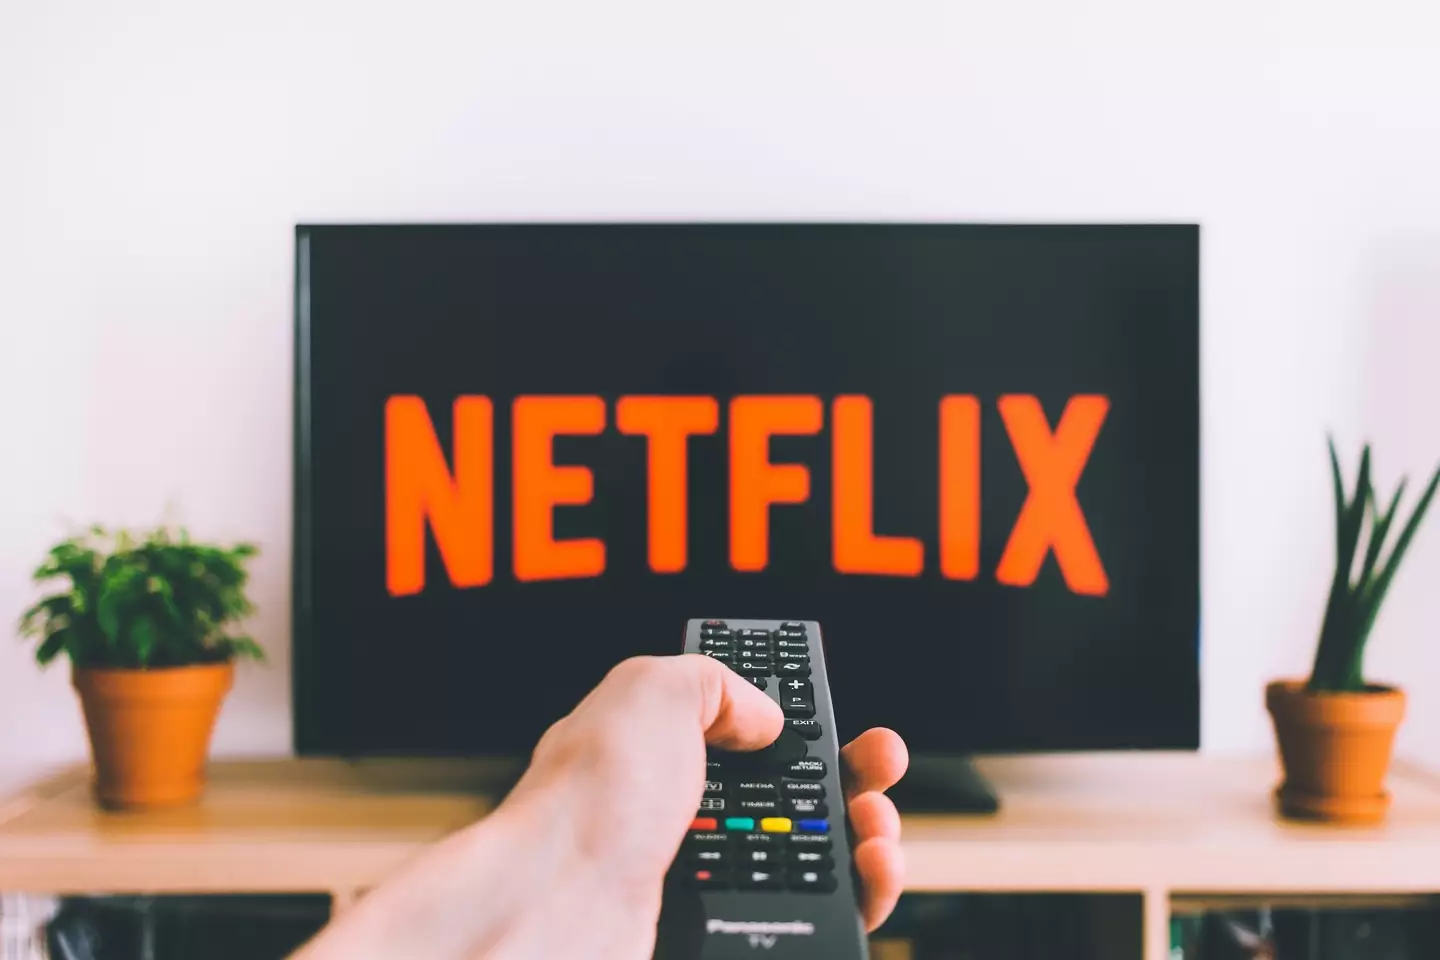 Netflix will be introducing advertisements as an all-new feature to their subscription model.